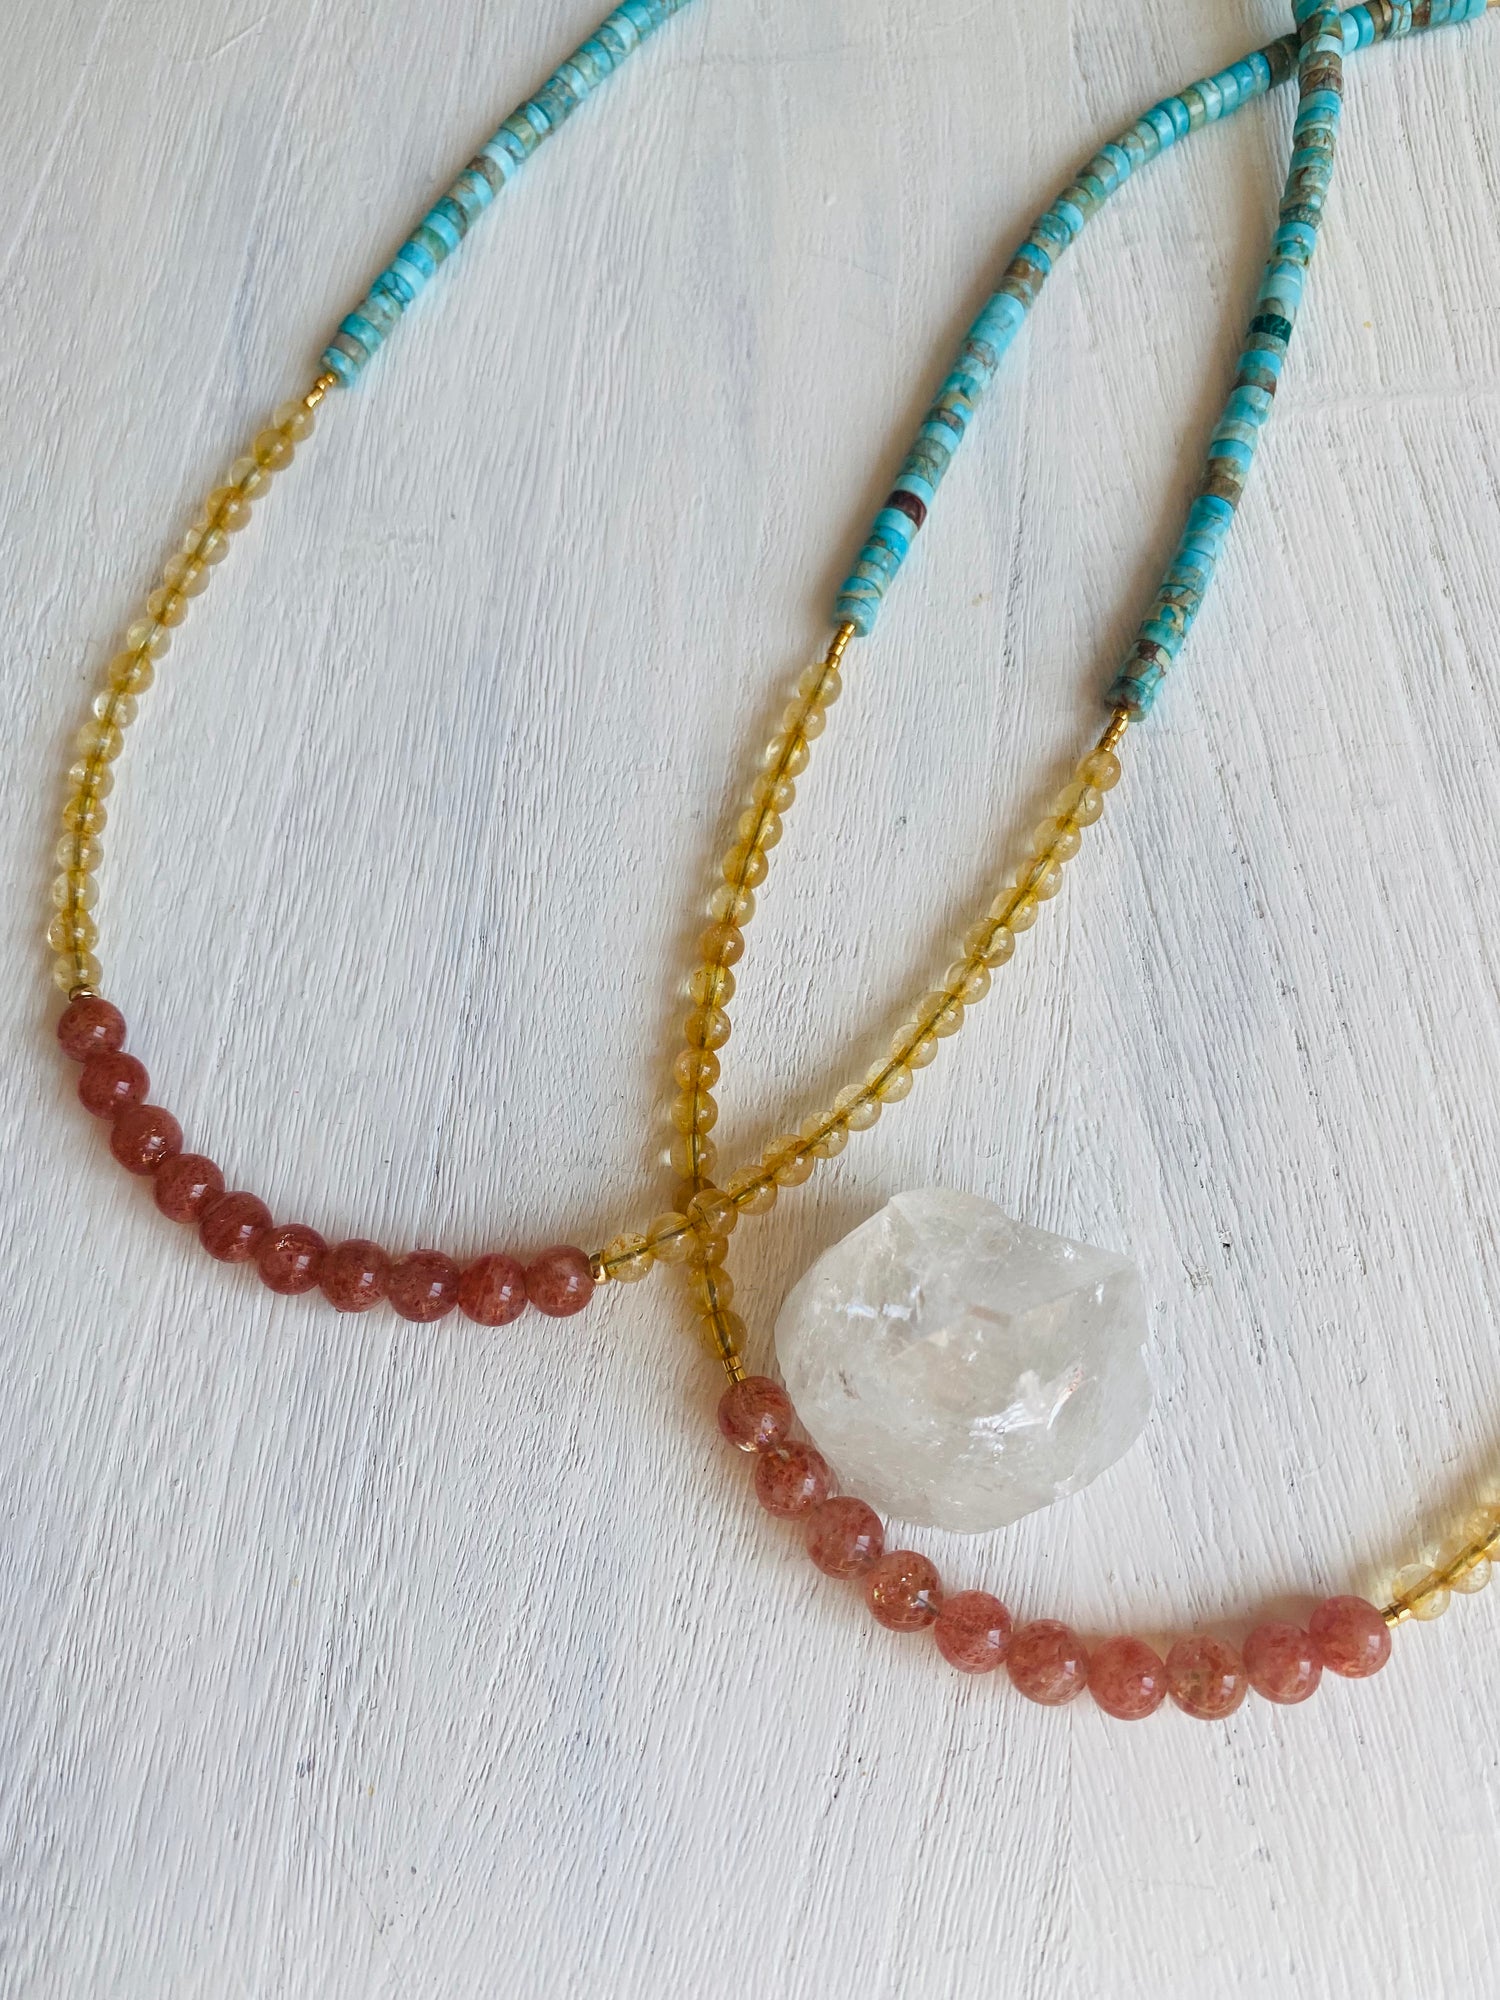 Two ;) of a Kind Gemstone Necklace #2 - Moon Room Shop and Wellness